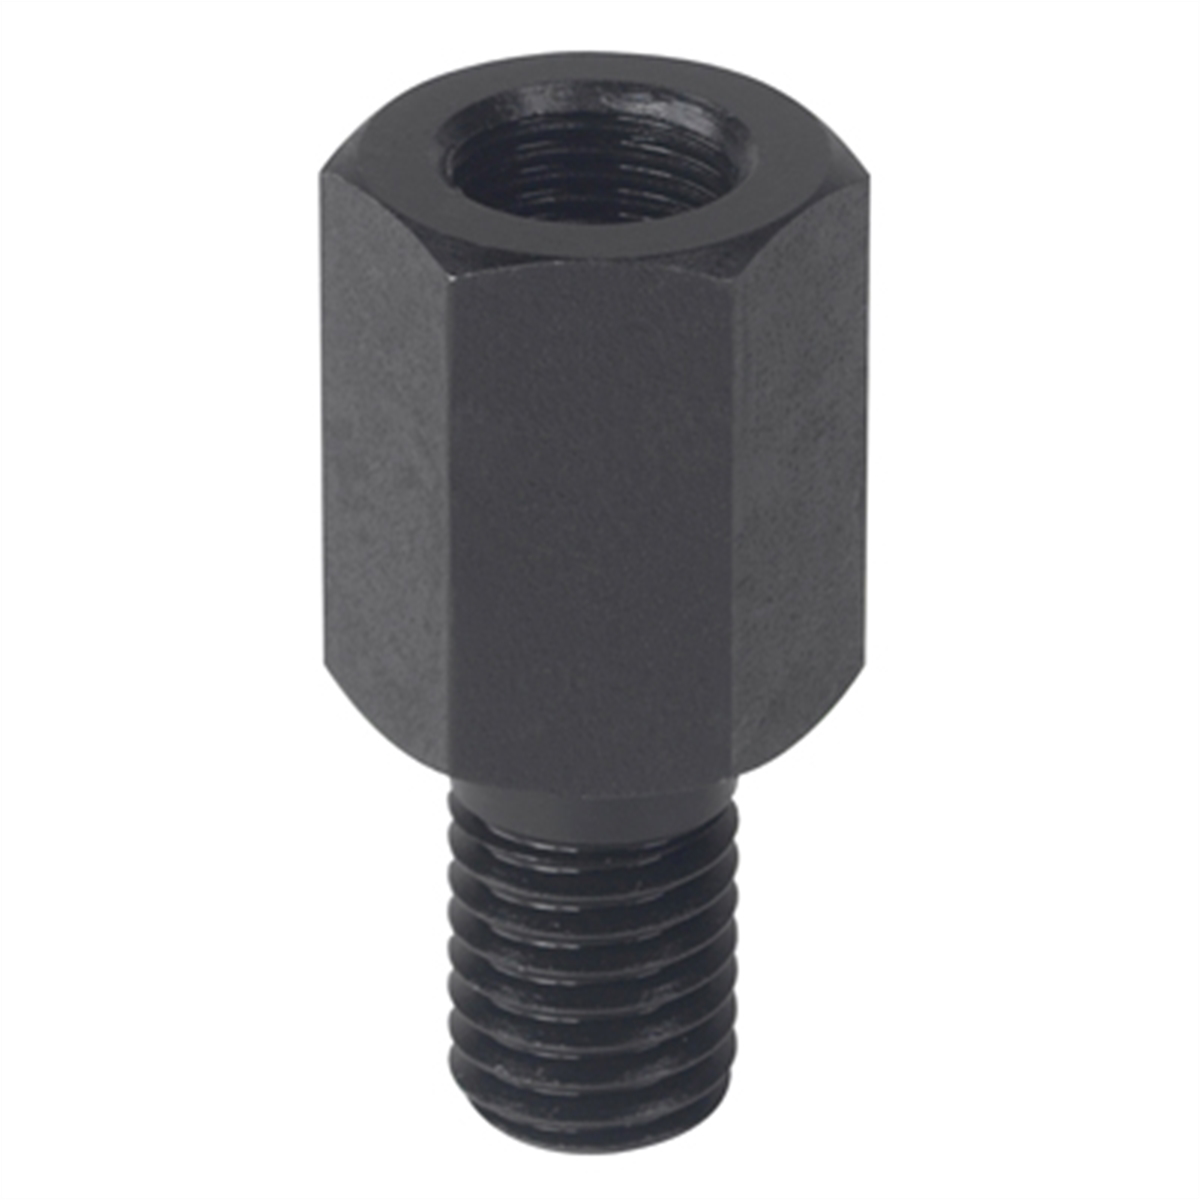 Puller Adapter 1-14 Female To 5/8-11 Male